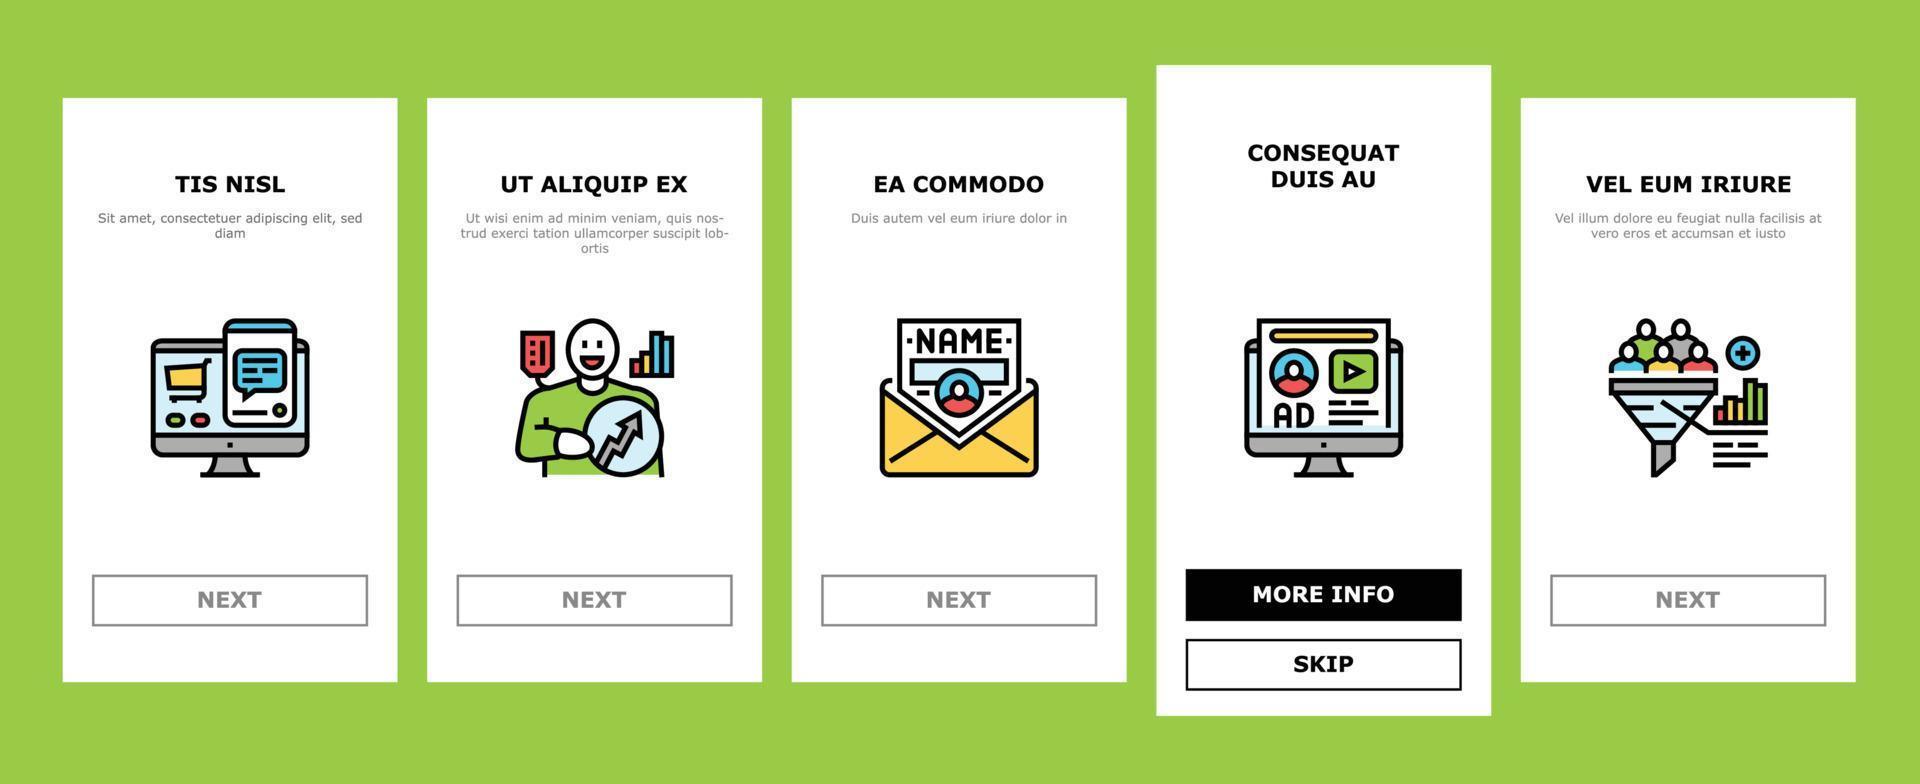 lead marketing generation onboarding icons set vector